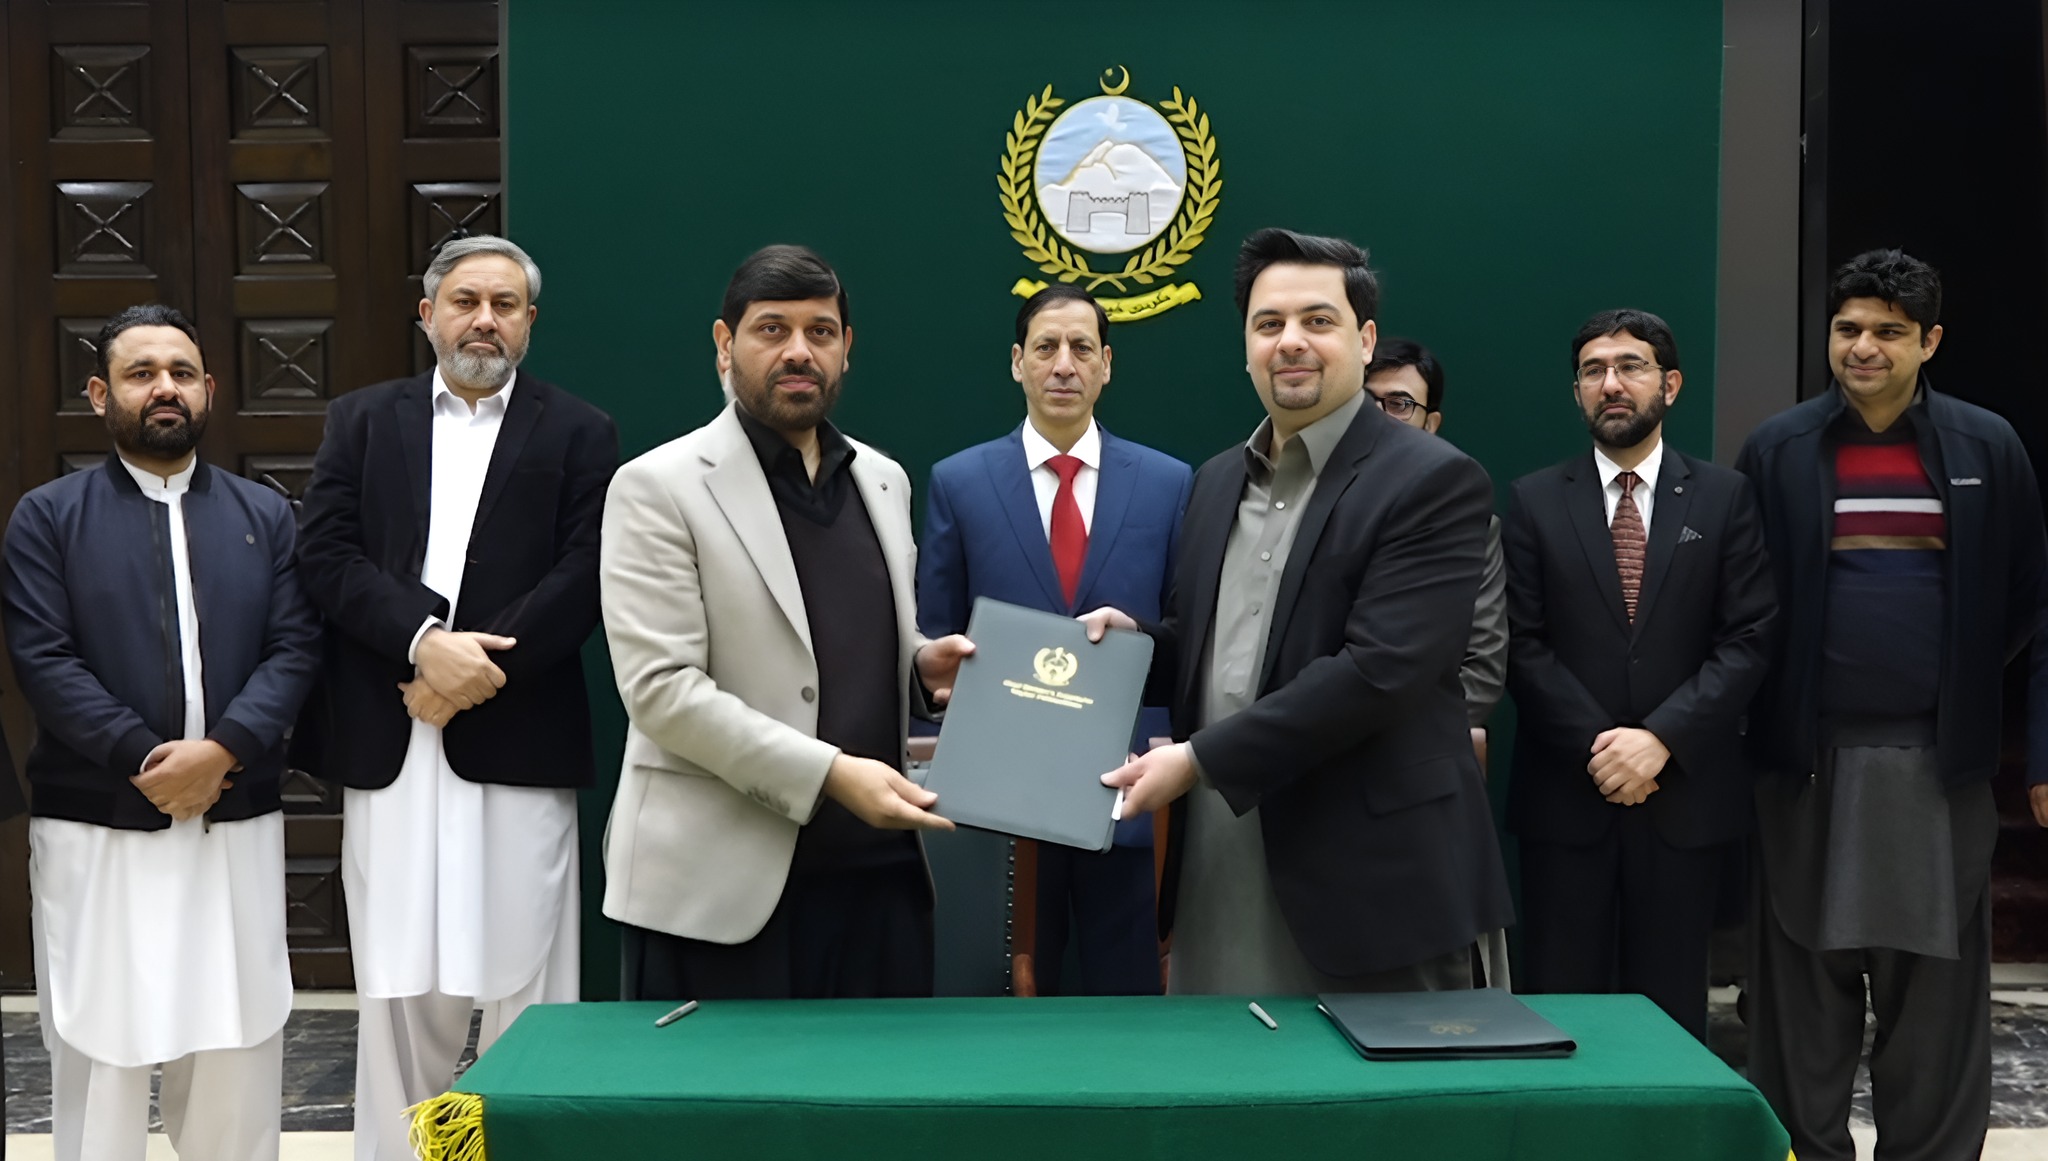 Alkhidmat Joins Hands with KP government for Bano Qabil IT program